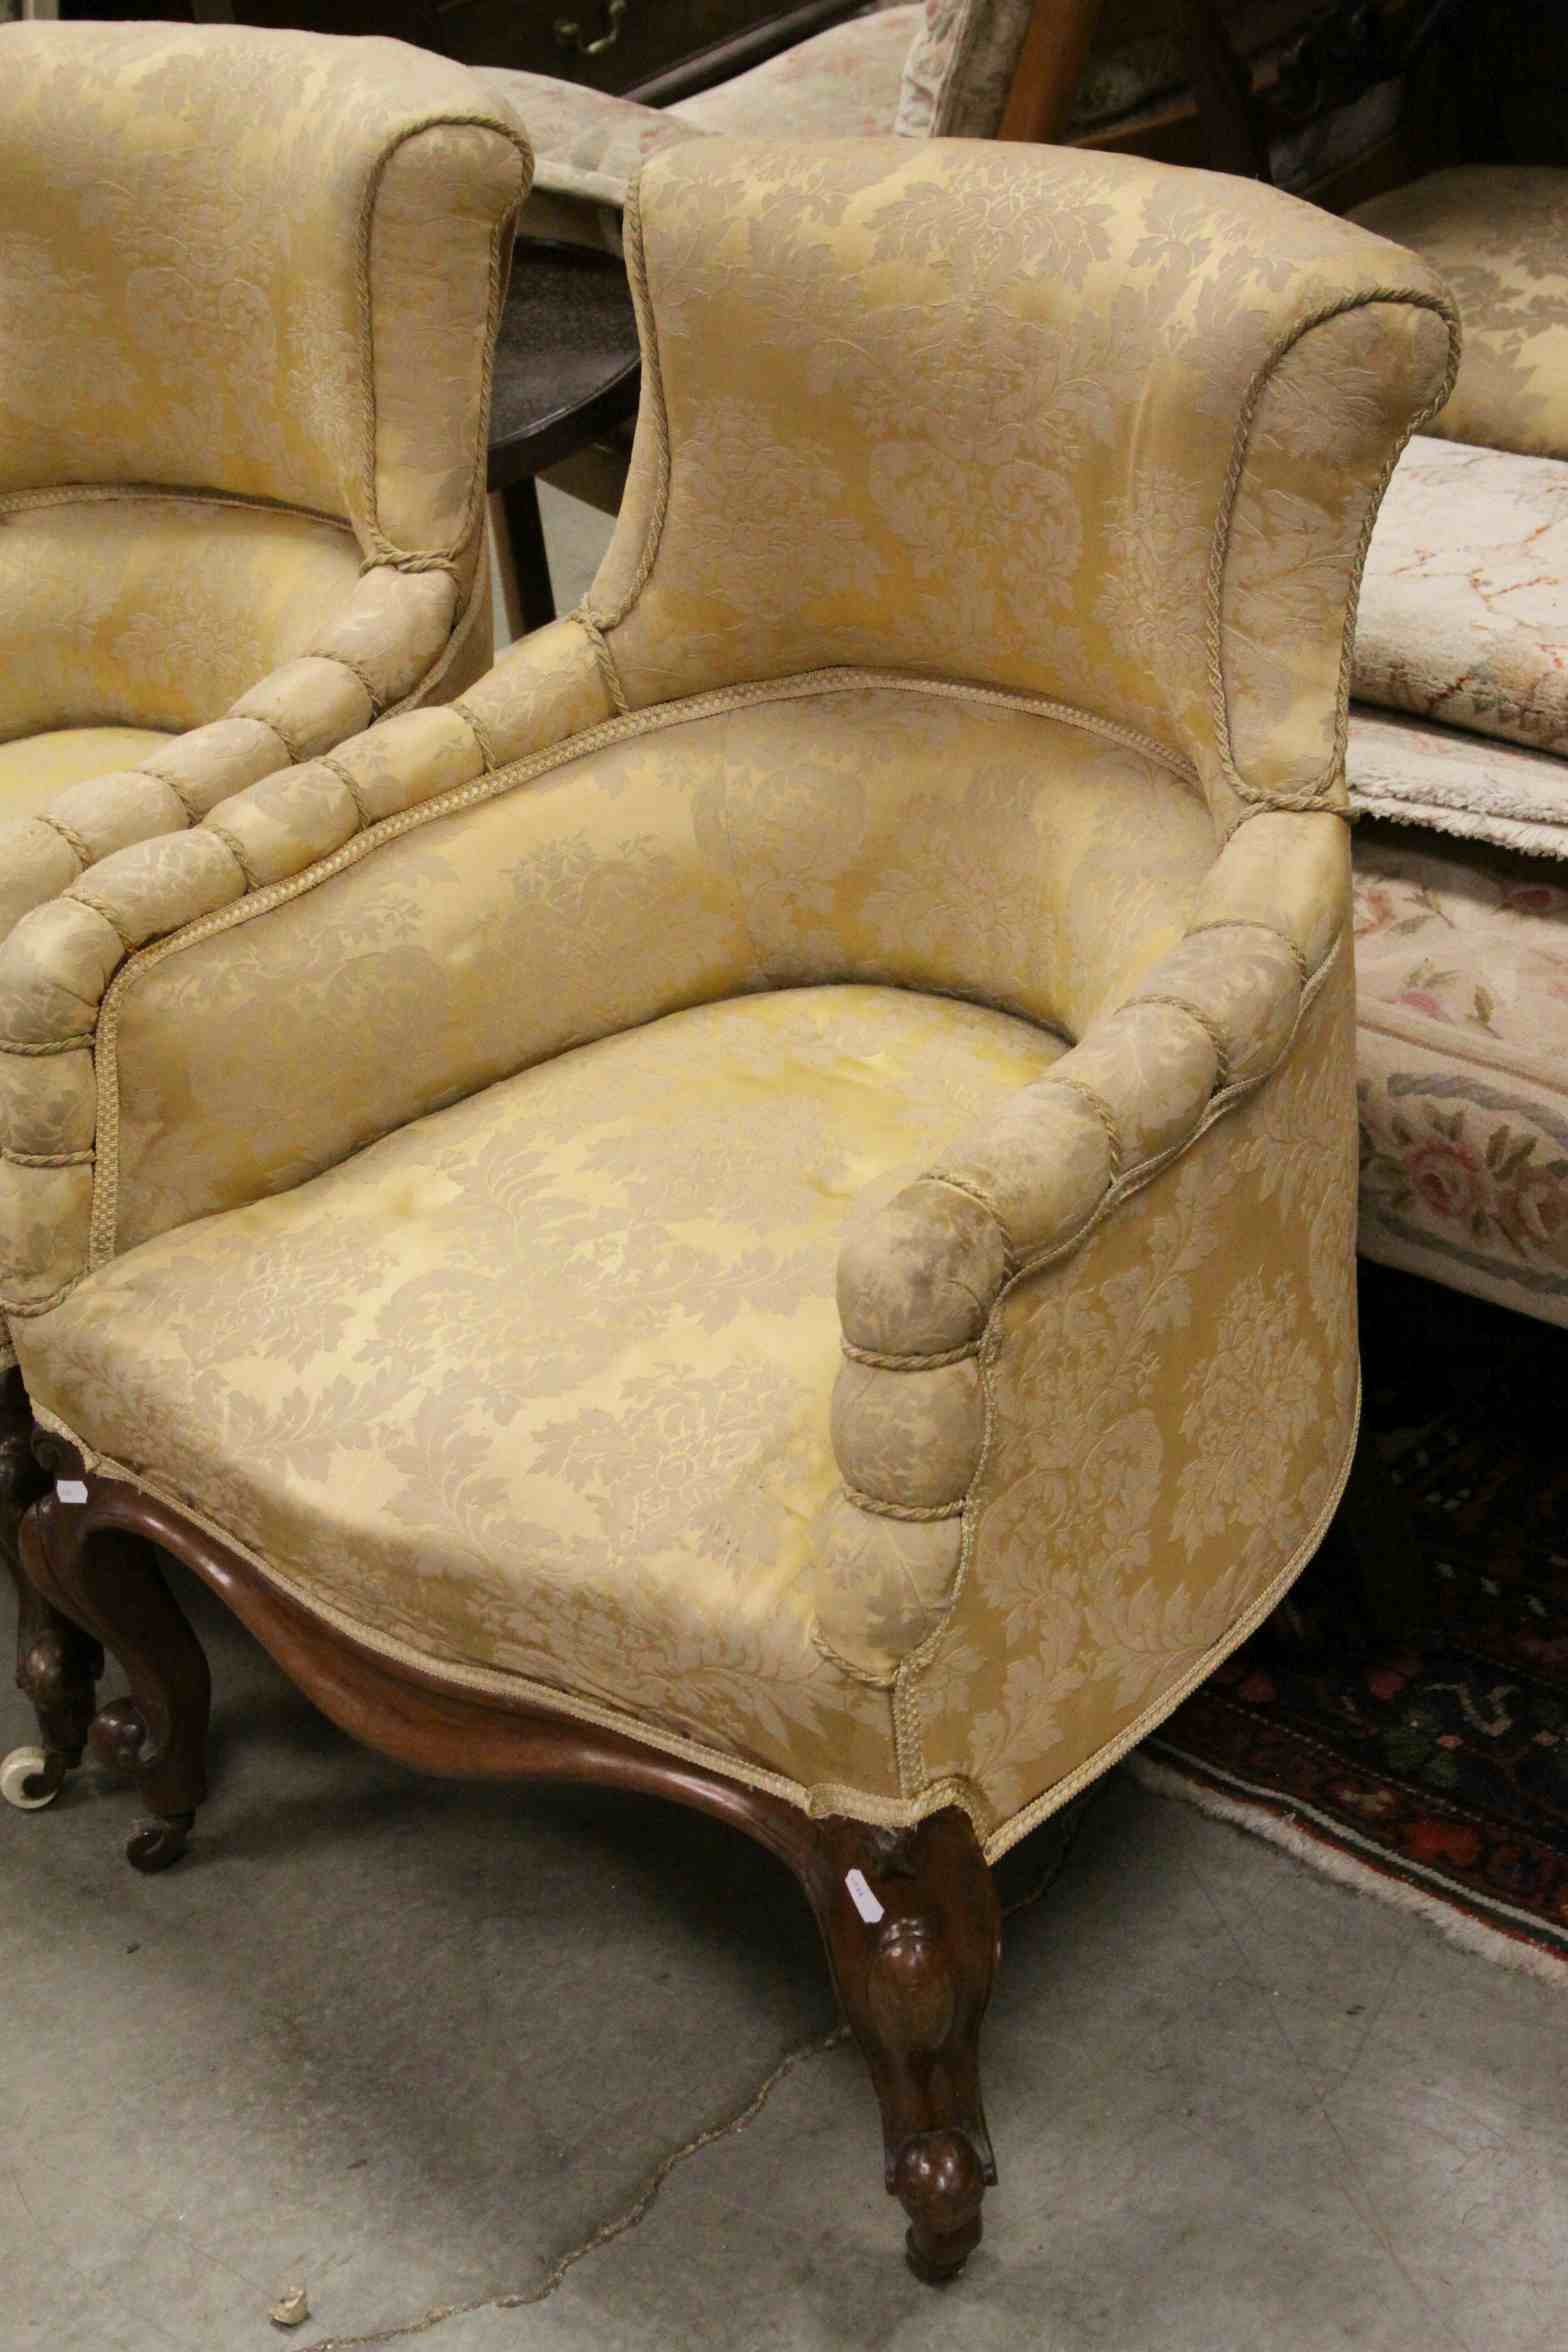 Pair of 19th century Mahogany Framed Tub Armchairs upholstered in matching yellow mustard fabric, - Image 3 of 4